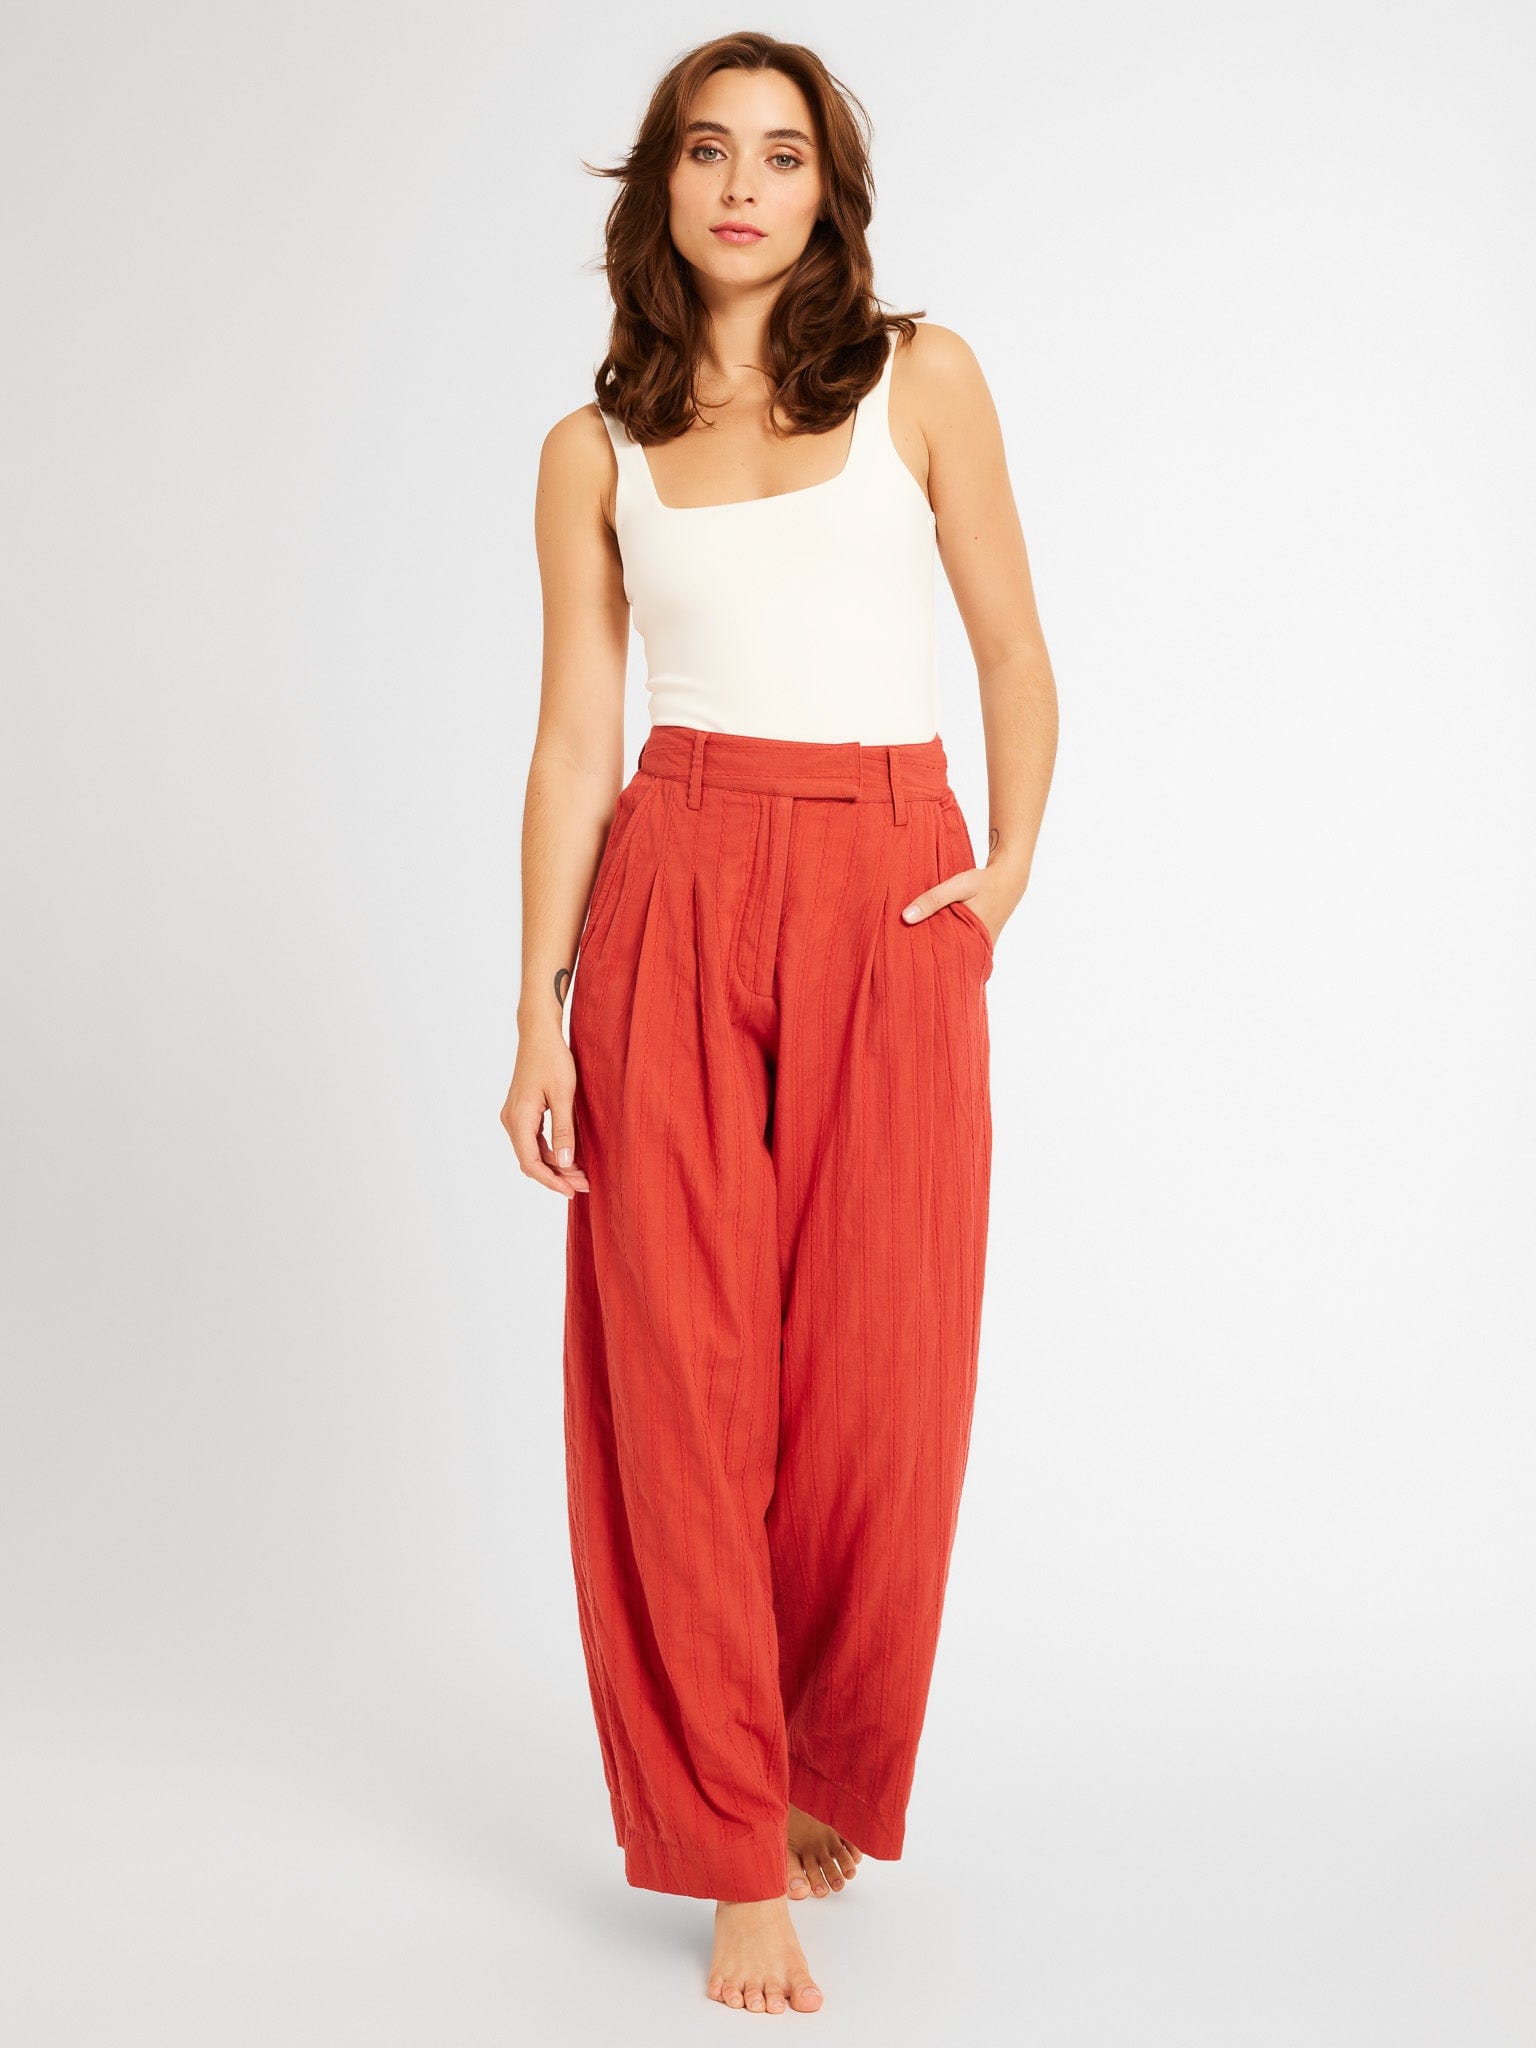 MILLE Clothing Cara Pant in Spice